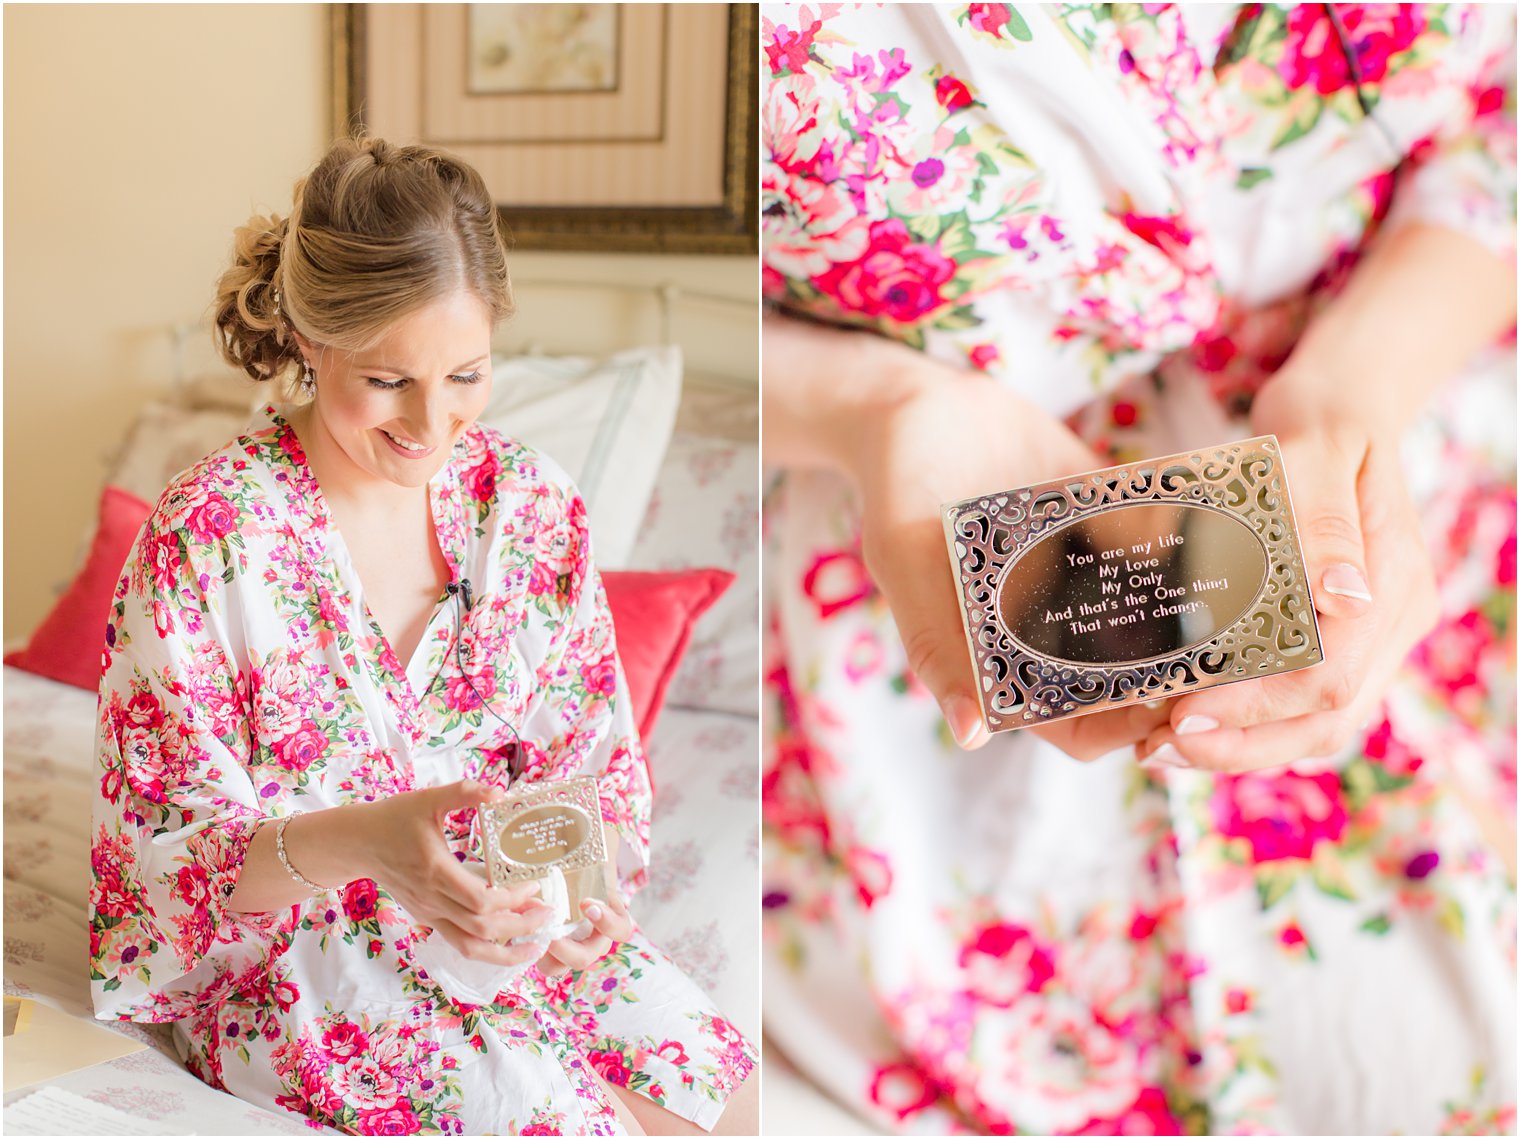 Bride opening her gift from her groom on wedding day 